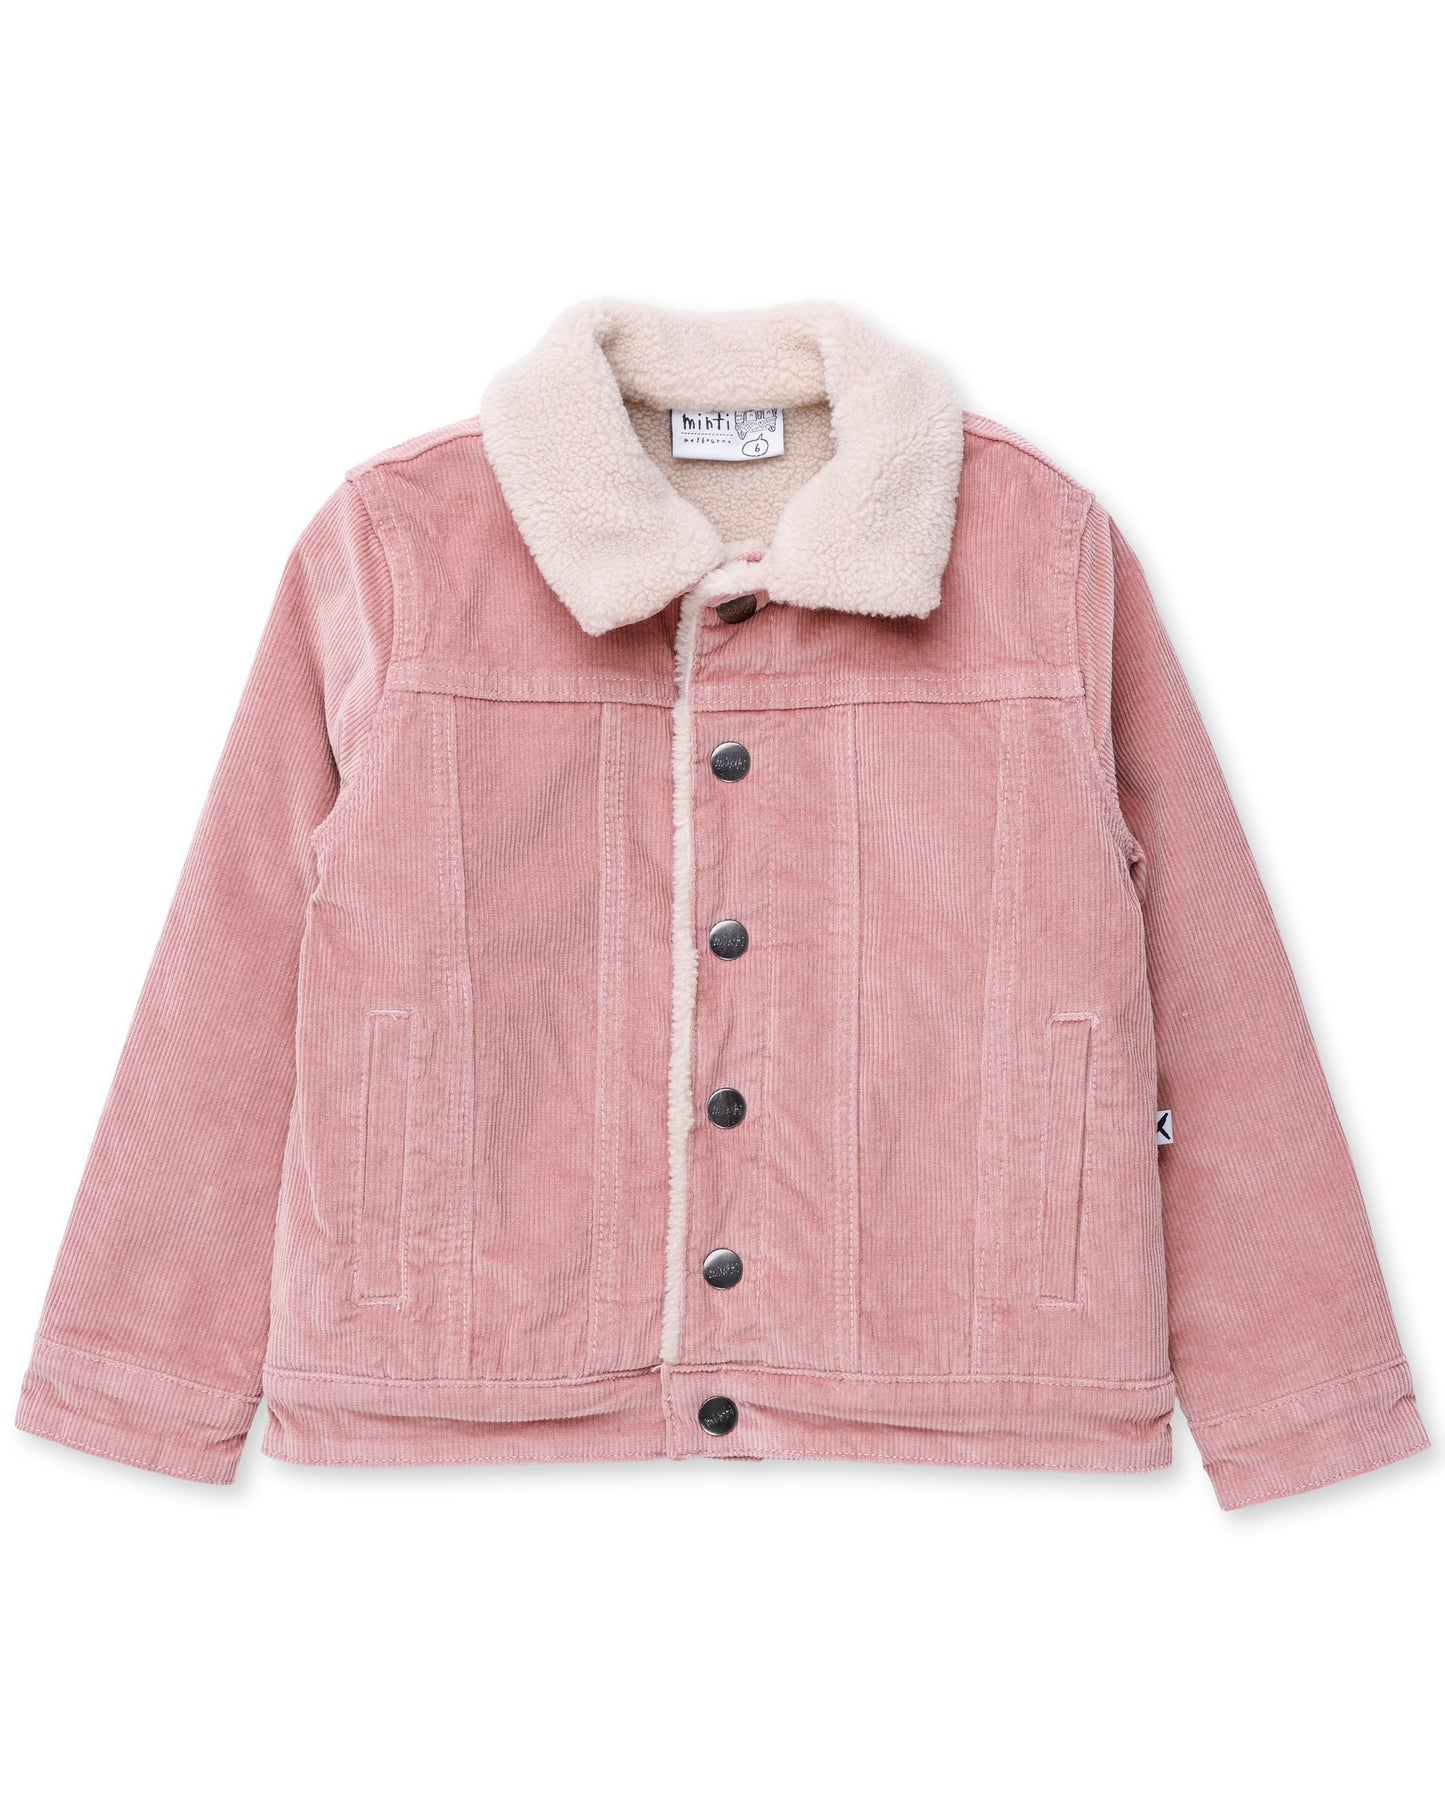 Teddy Lined Cord Bomber - Lucky Last! (Size 5/6y)